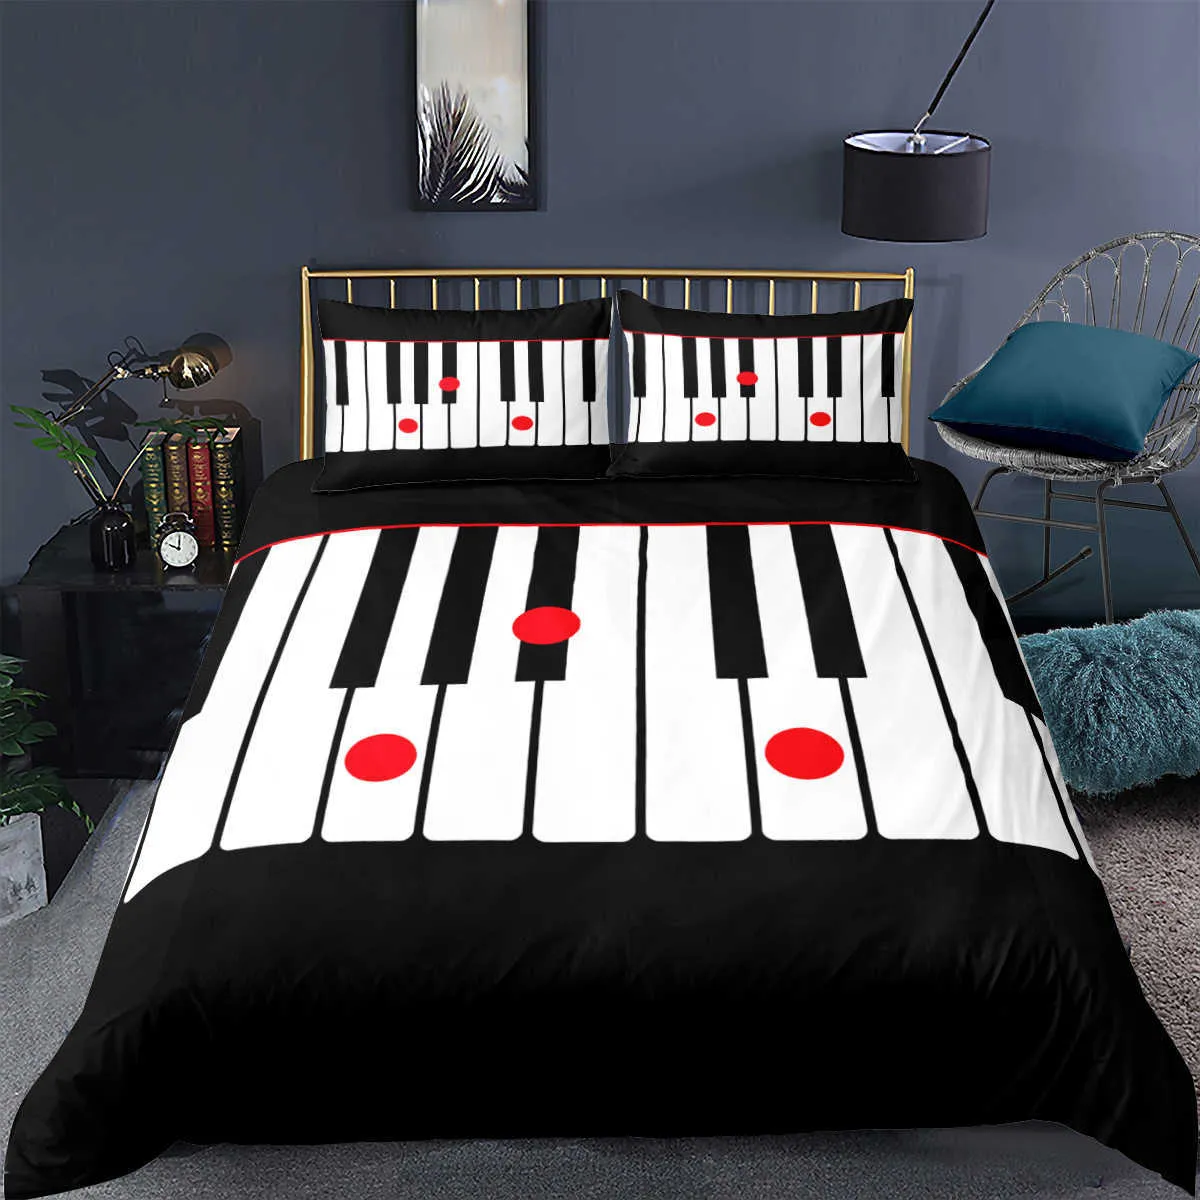 Piano Music Note Printed Bedding Set 3D Luxury Bed Set Comporters Adults Kids Däcke Cover Pudowcase Twin Queen King Size H09132939813